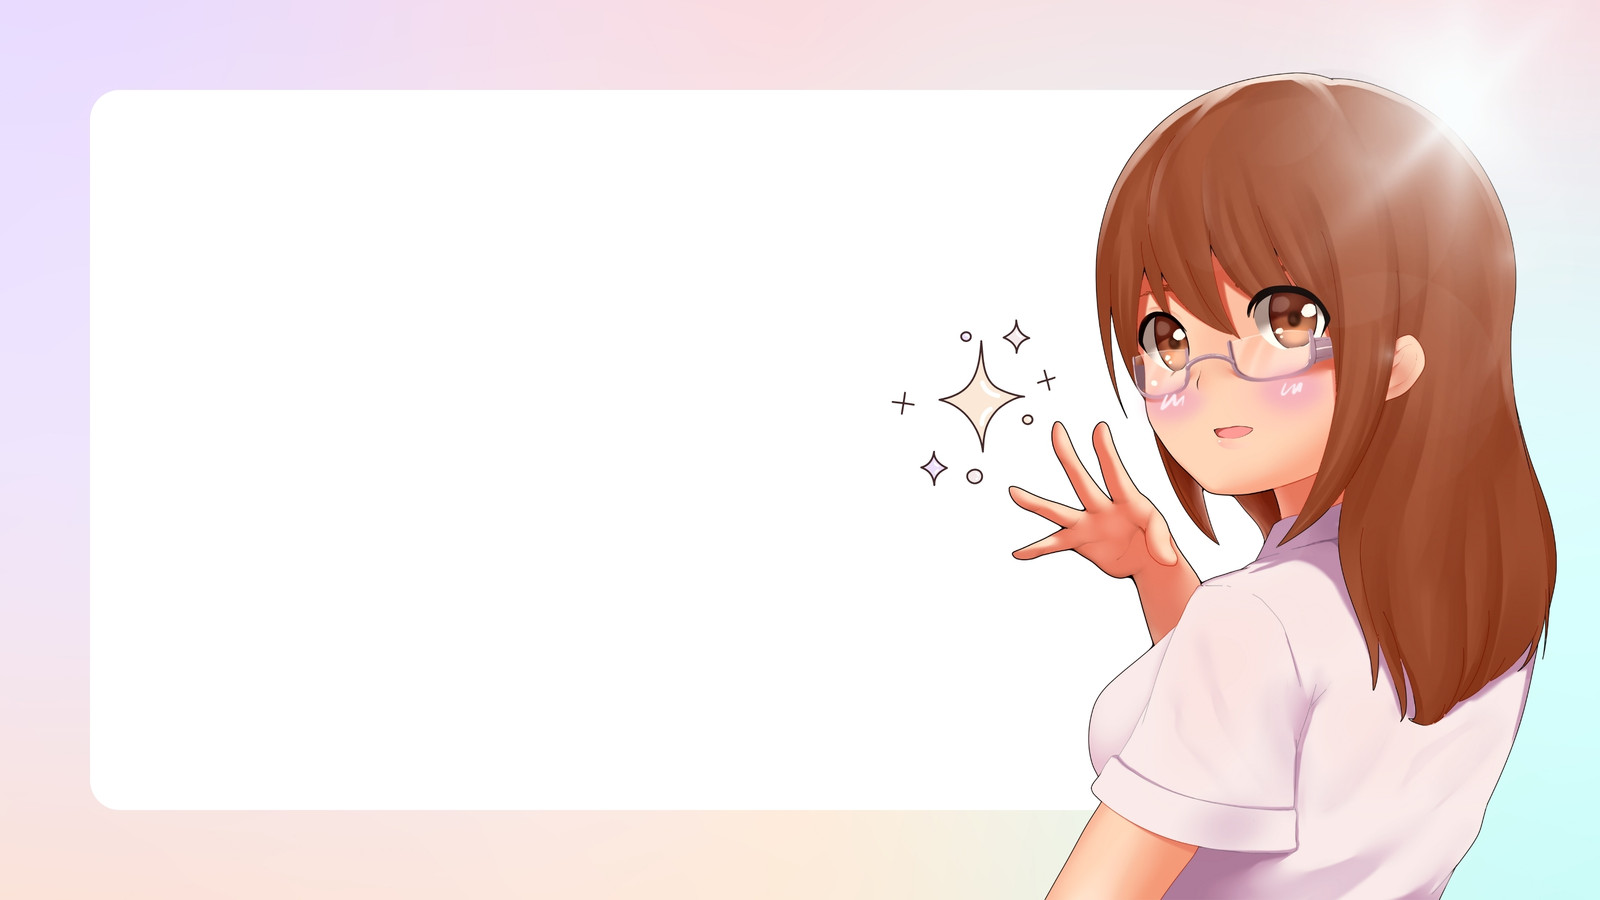 Some Kind Of Anime Anime Girl Looking At Foliage In The Evening Sky  Background, Anime Picture Gif, Gif, Geometric Powerpoint Background Image  And Wallpaper for Free Download